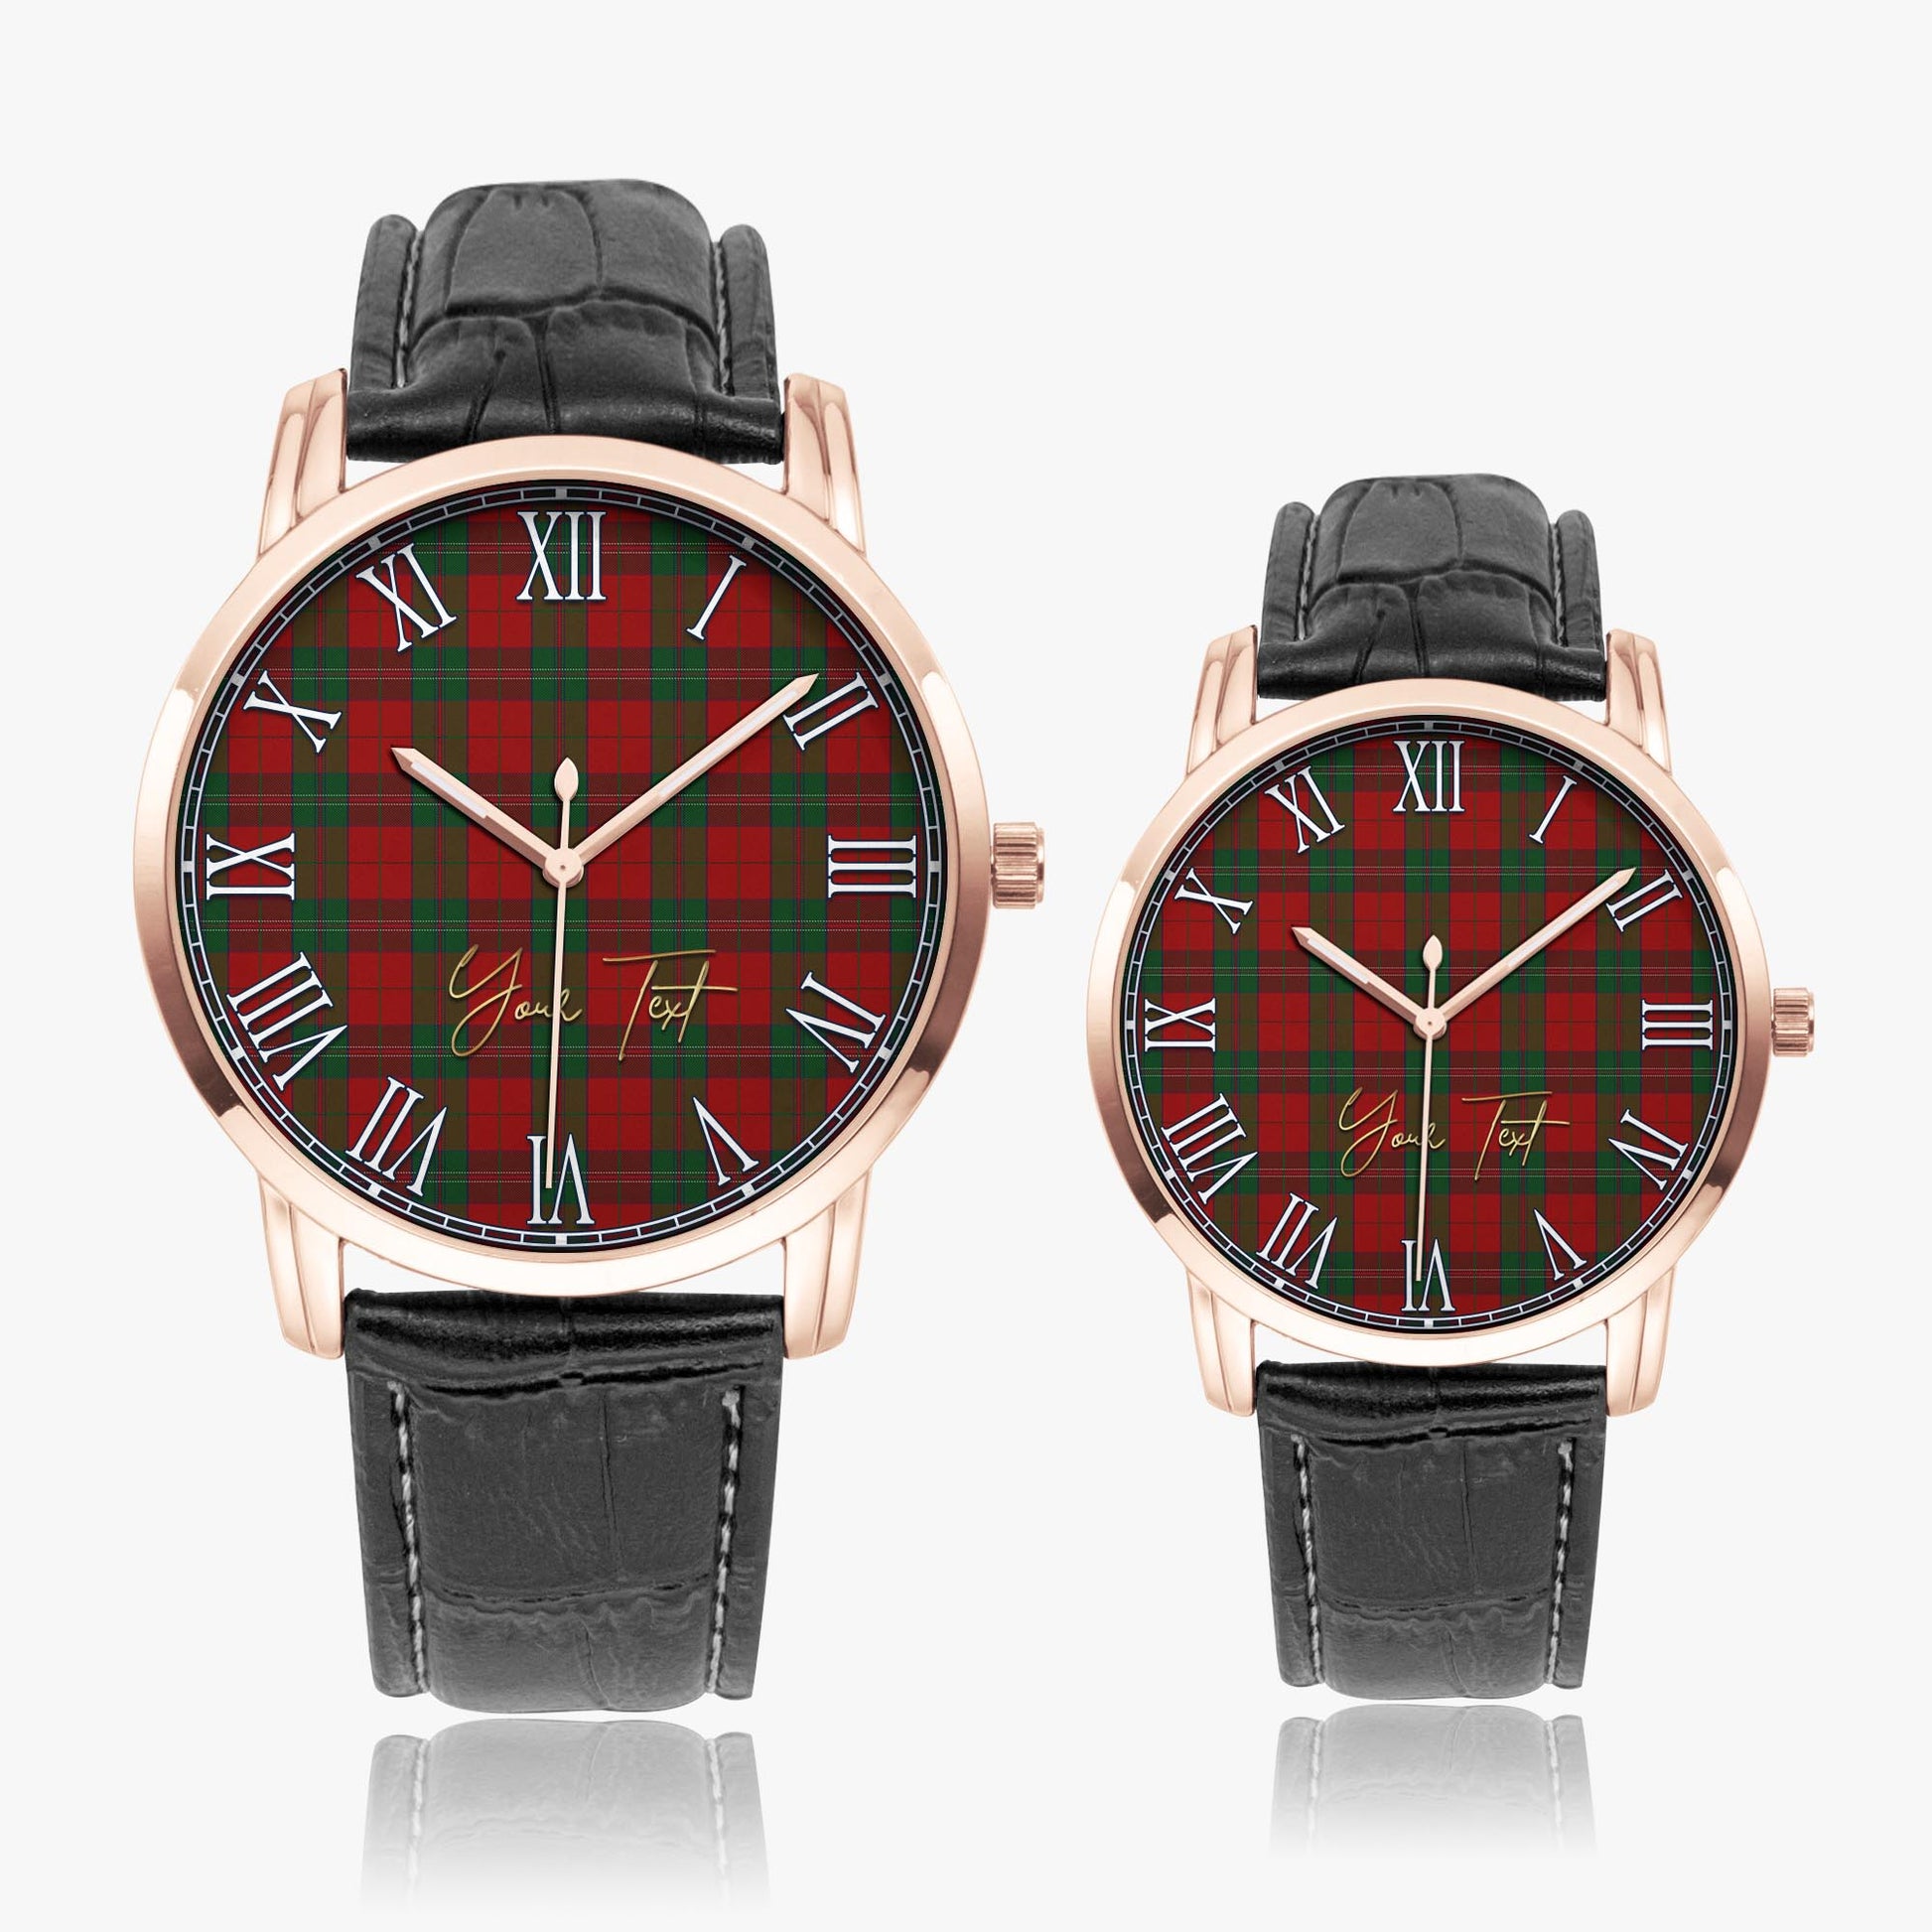 Thomas of Wales Tartan Personalized Your Text Leather Trap Quartz Watch Wide Type Rose Gold Case With Black Leather Strap - Tartanvibesclothing Shop